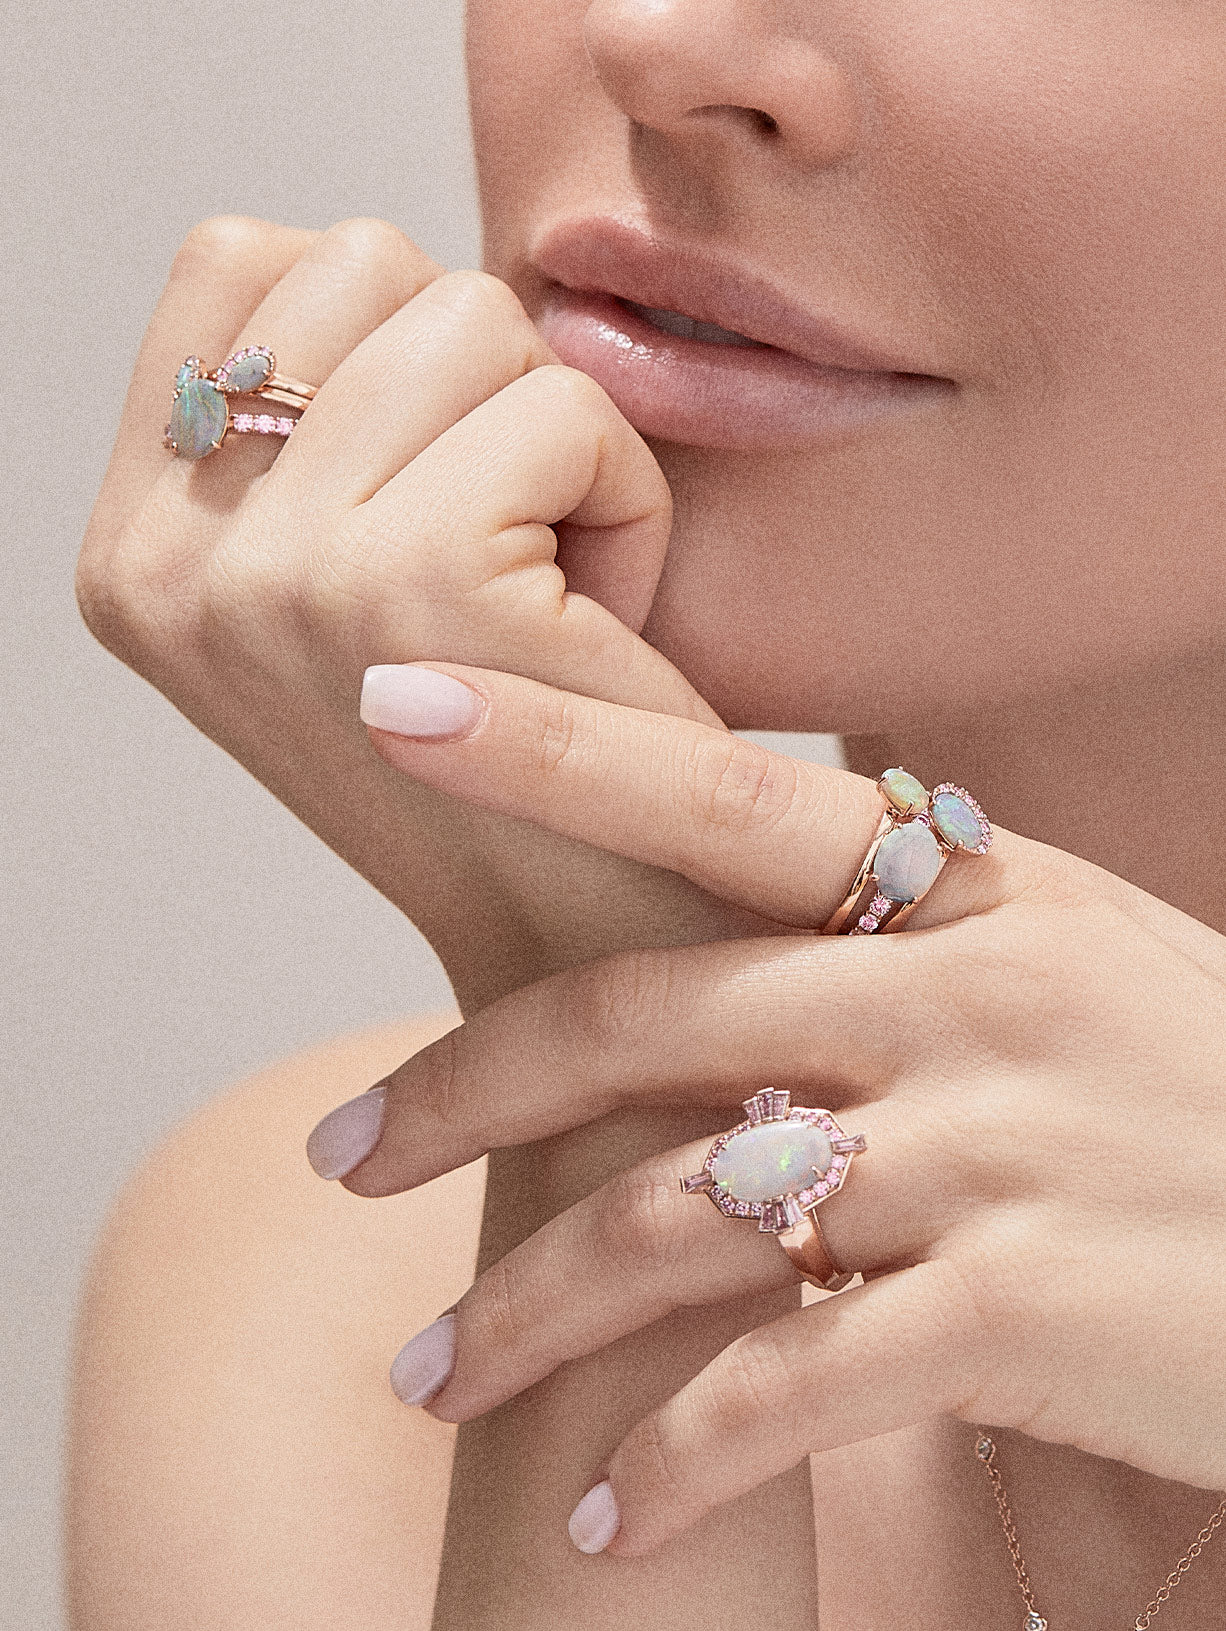 Argyle Pink™ Diamond and Opal Stacking Ring - Pink Diamonds, J FINE - J Fine, Rings - Pink Diamond Jewelry, argyle-pink™-diamond-and-opal-stacking-ring-by-j-fine-2 - Argyle Pink Diamonds